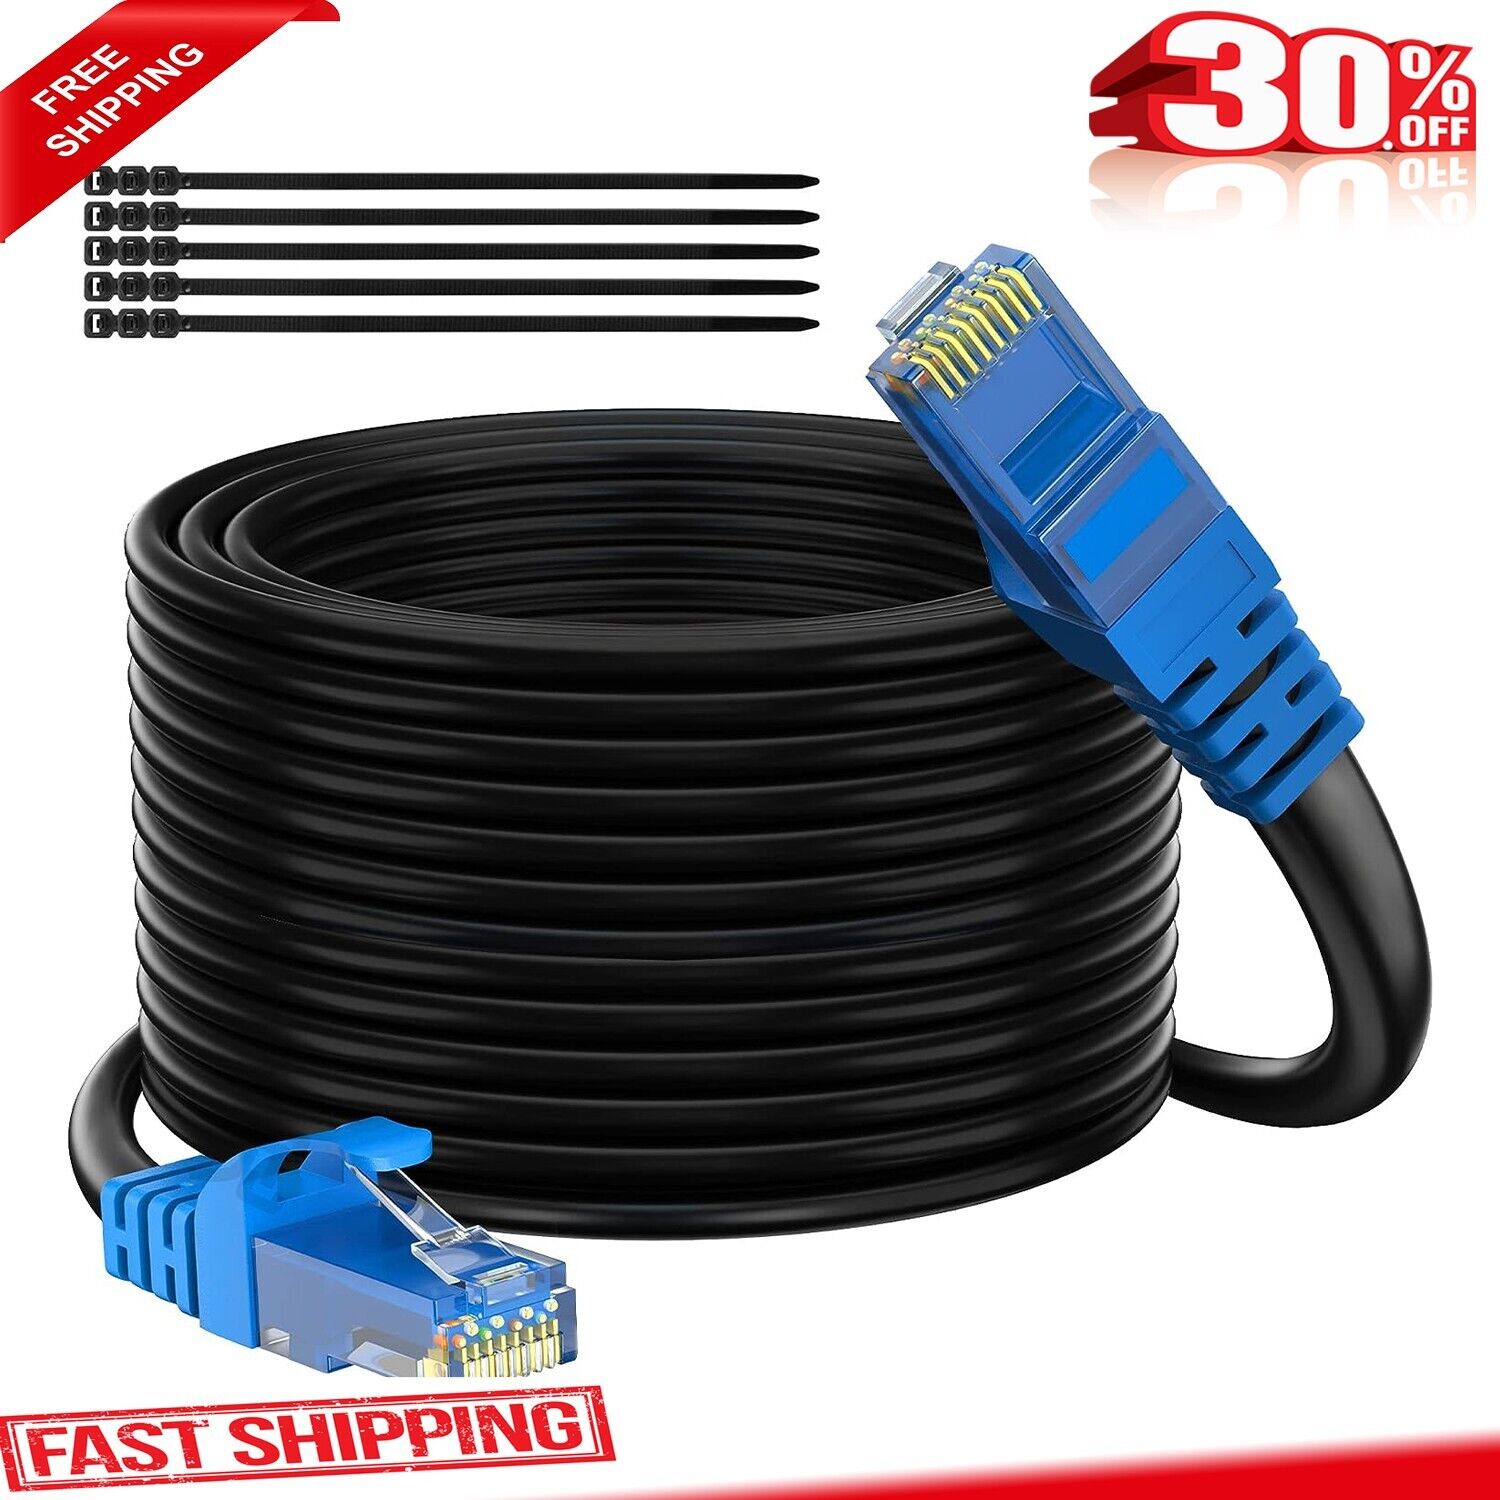 Cat 6 Outdoor Ethernet Cable 250 ft,Heavy Duty Internet Cable (from 25-300 feet)